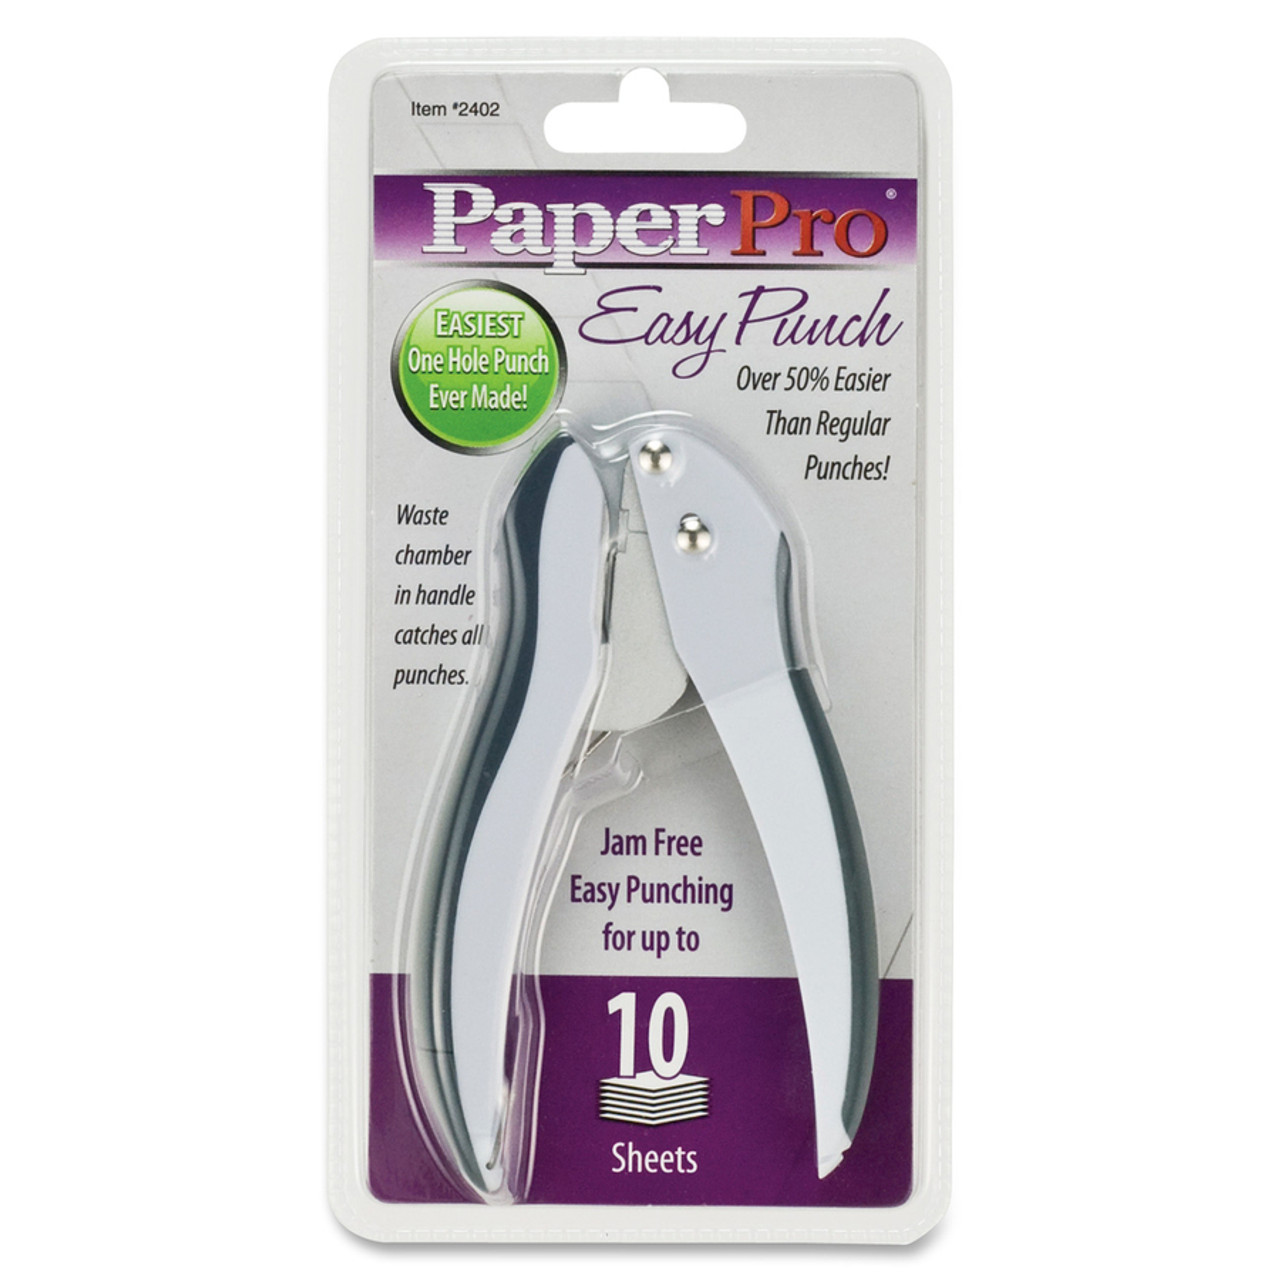 PaperPro Inlight 10 One-Hole Punch